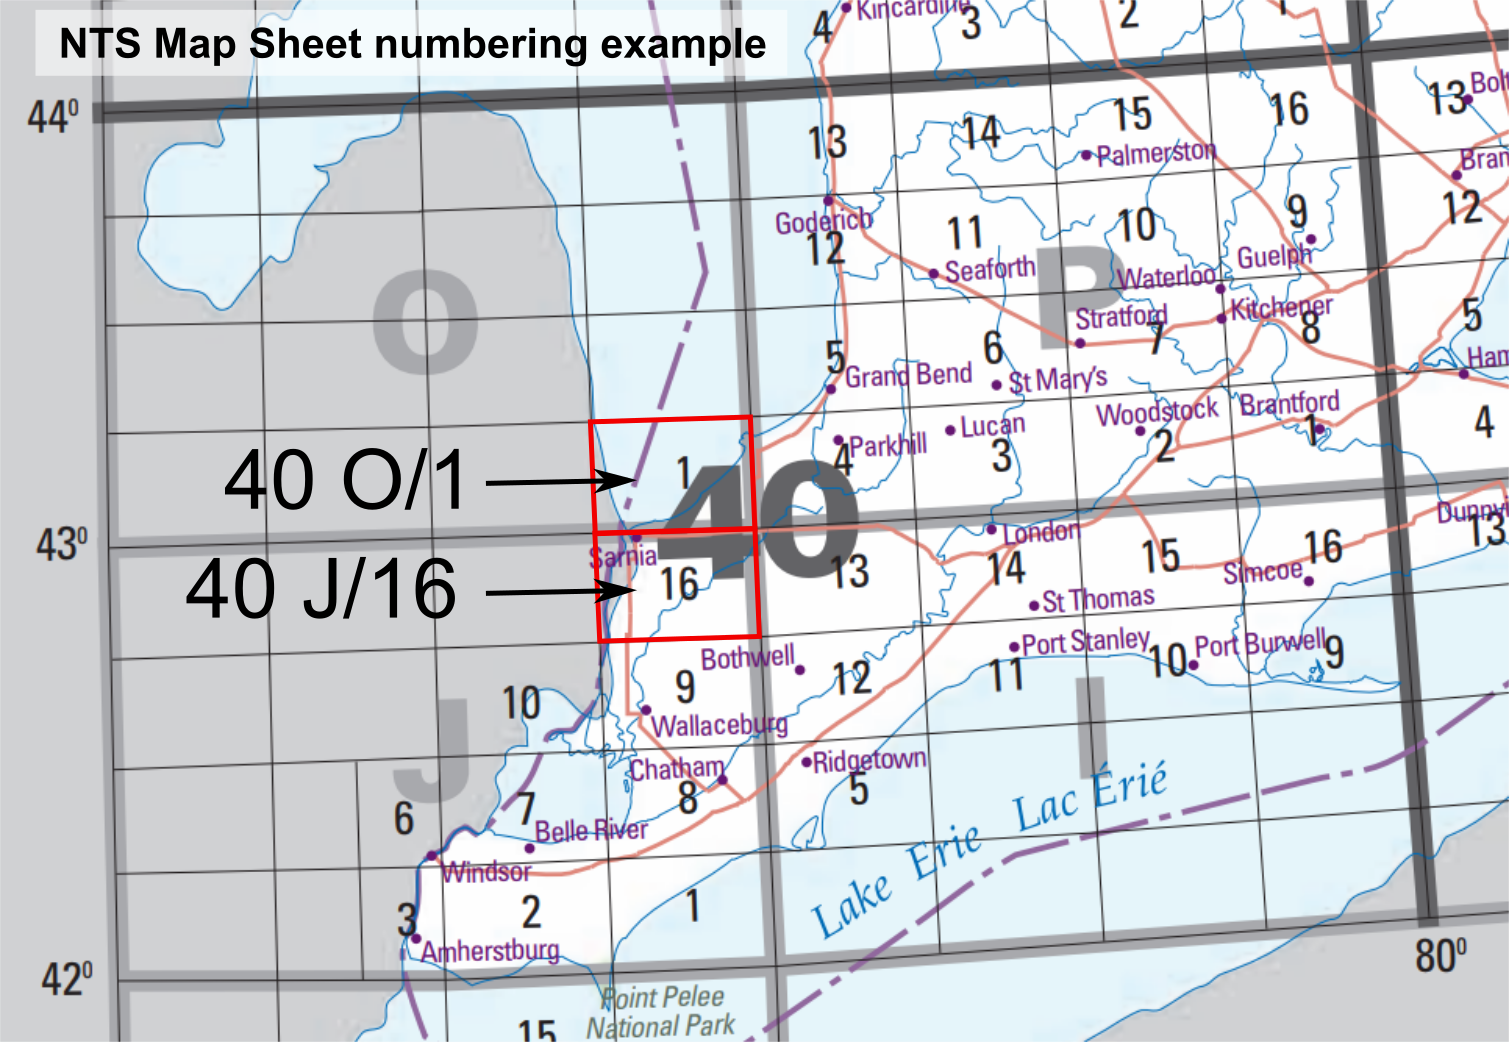 Using PDF index to determine map sheet numbers